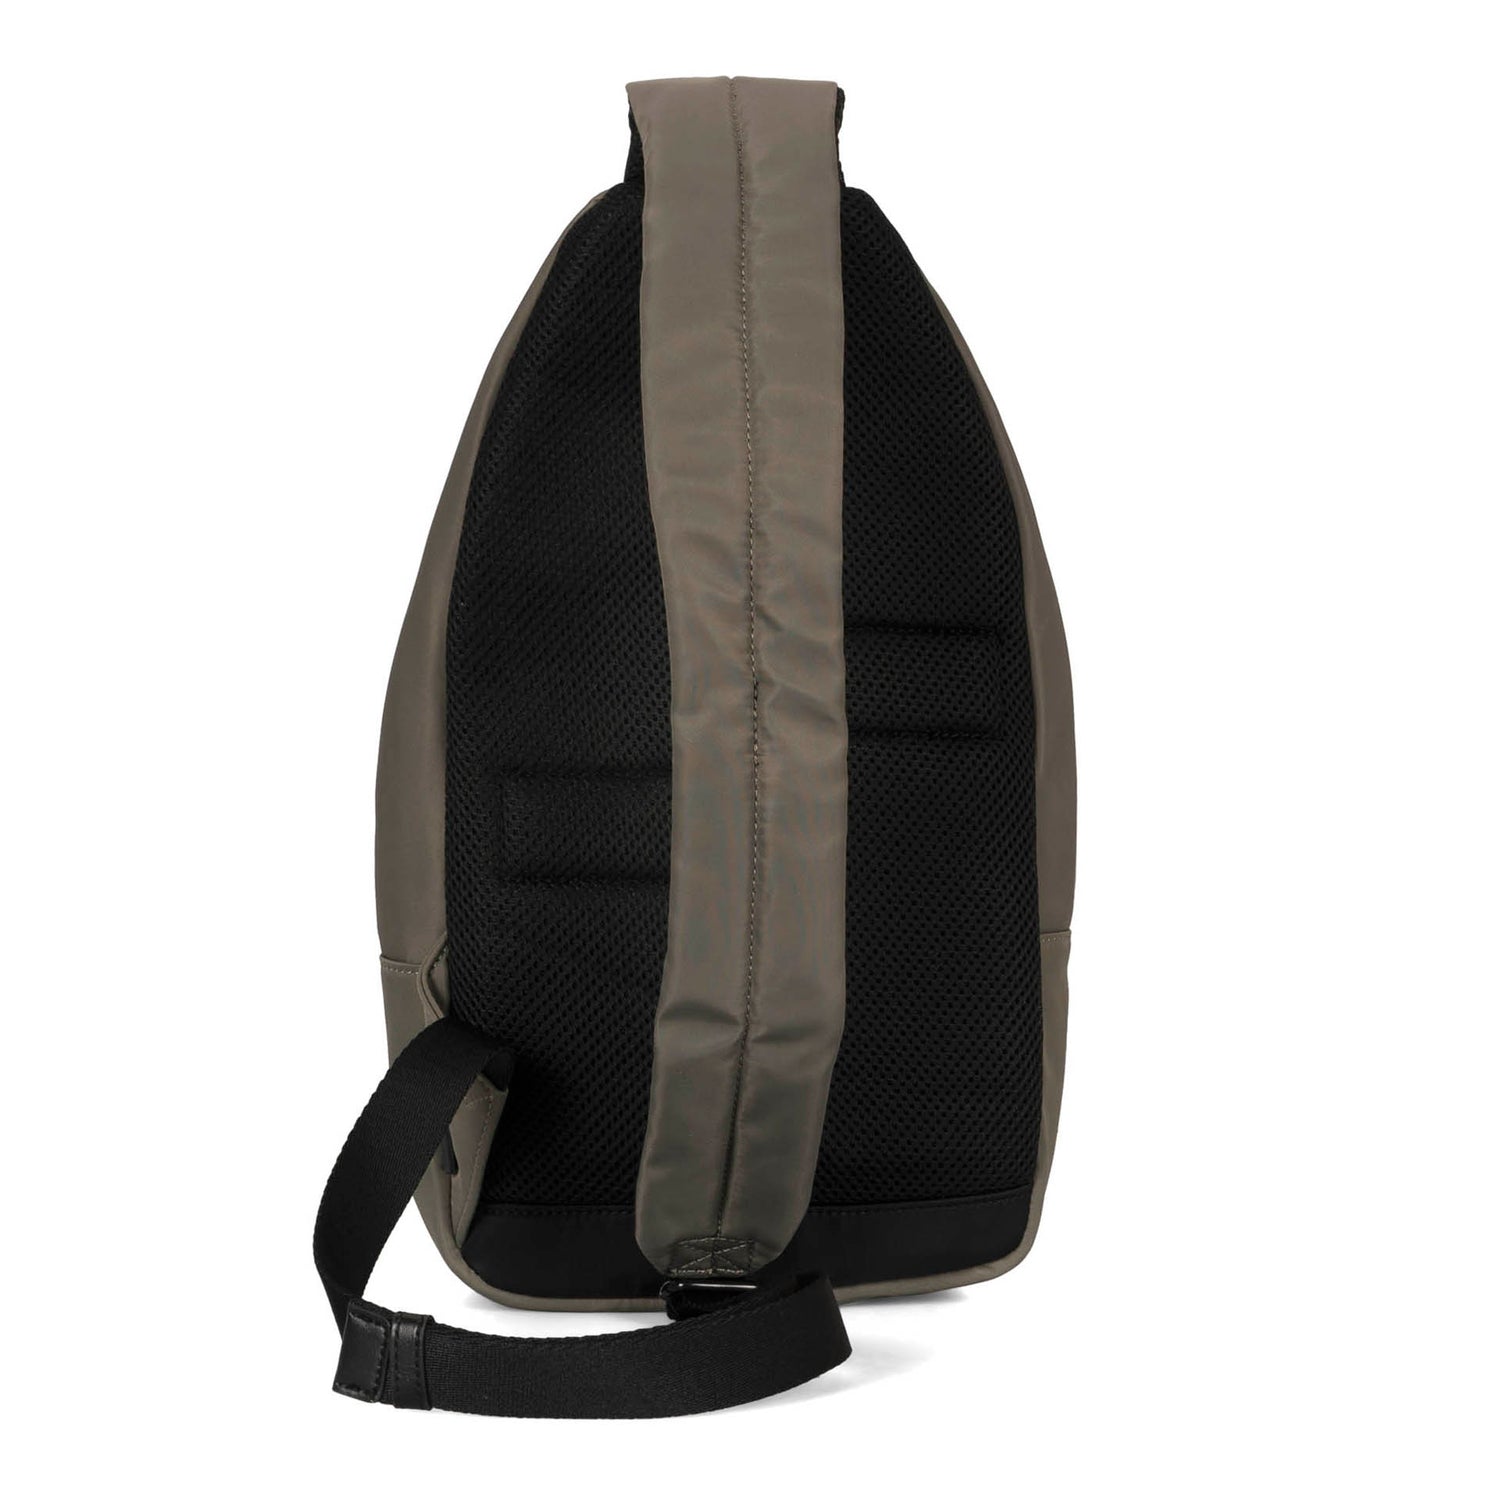 Back side of a grey-green sling bag called suttong designed by Tracker on a white background, showcasing its strap and padded back panel.